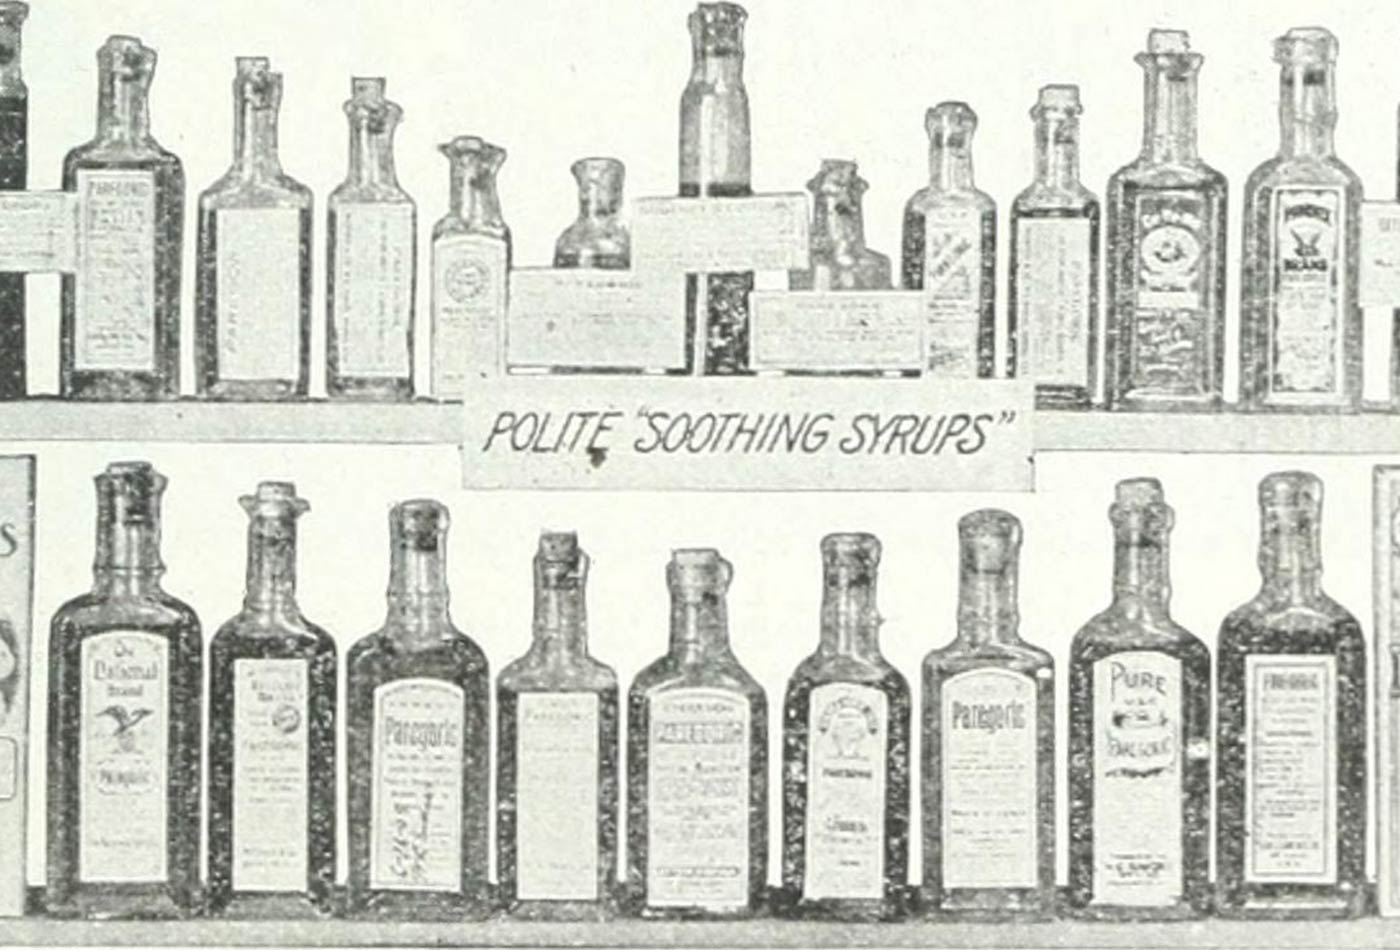 Image from "Nostrums and quackery," from "The Journal of the American Medical Association," 1914